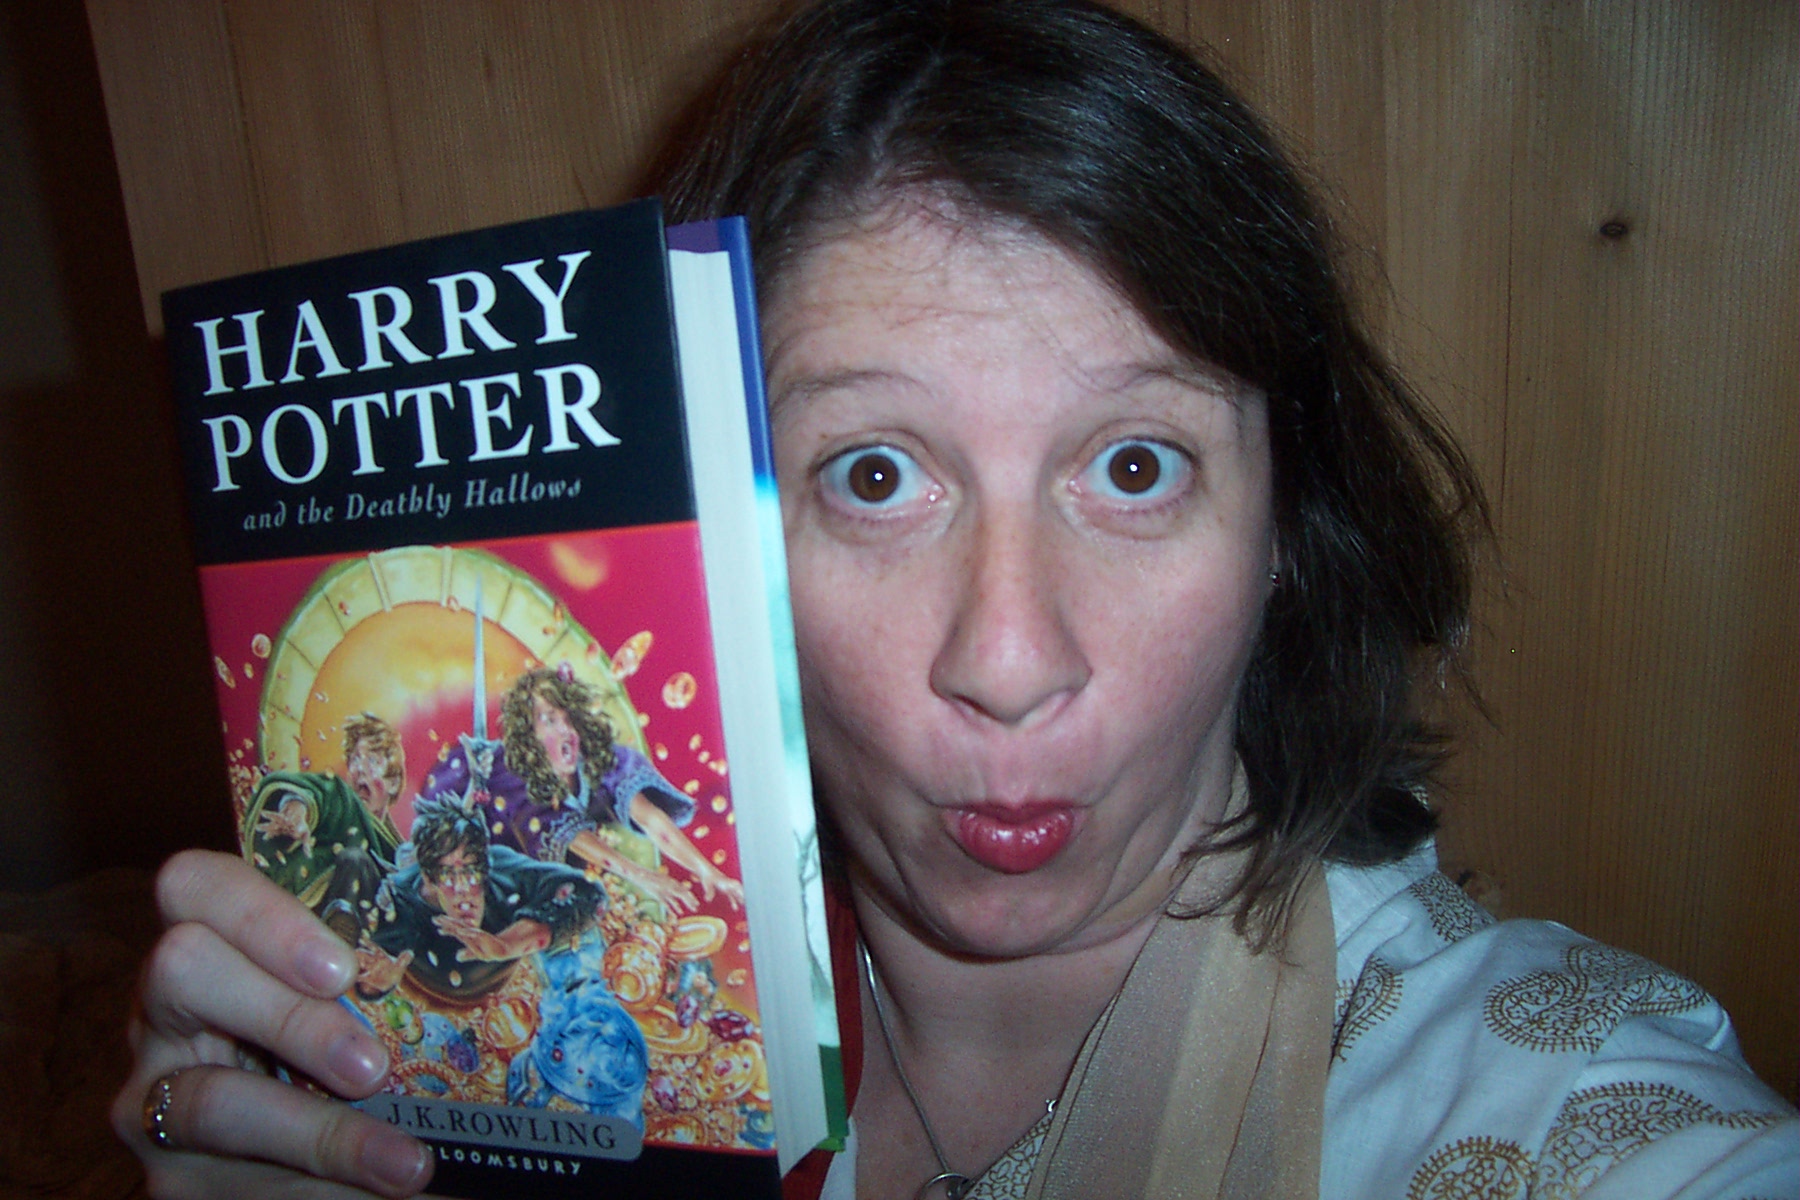 Jayne with Harry Potter book